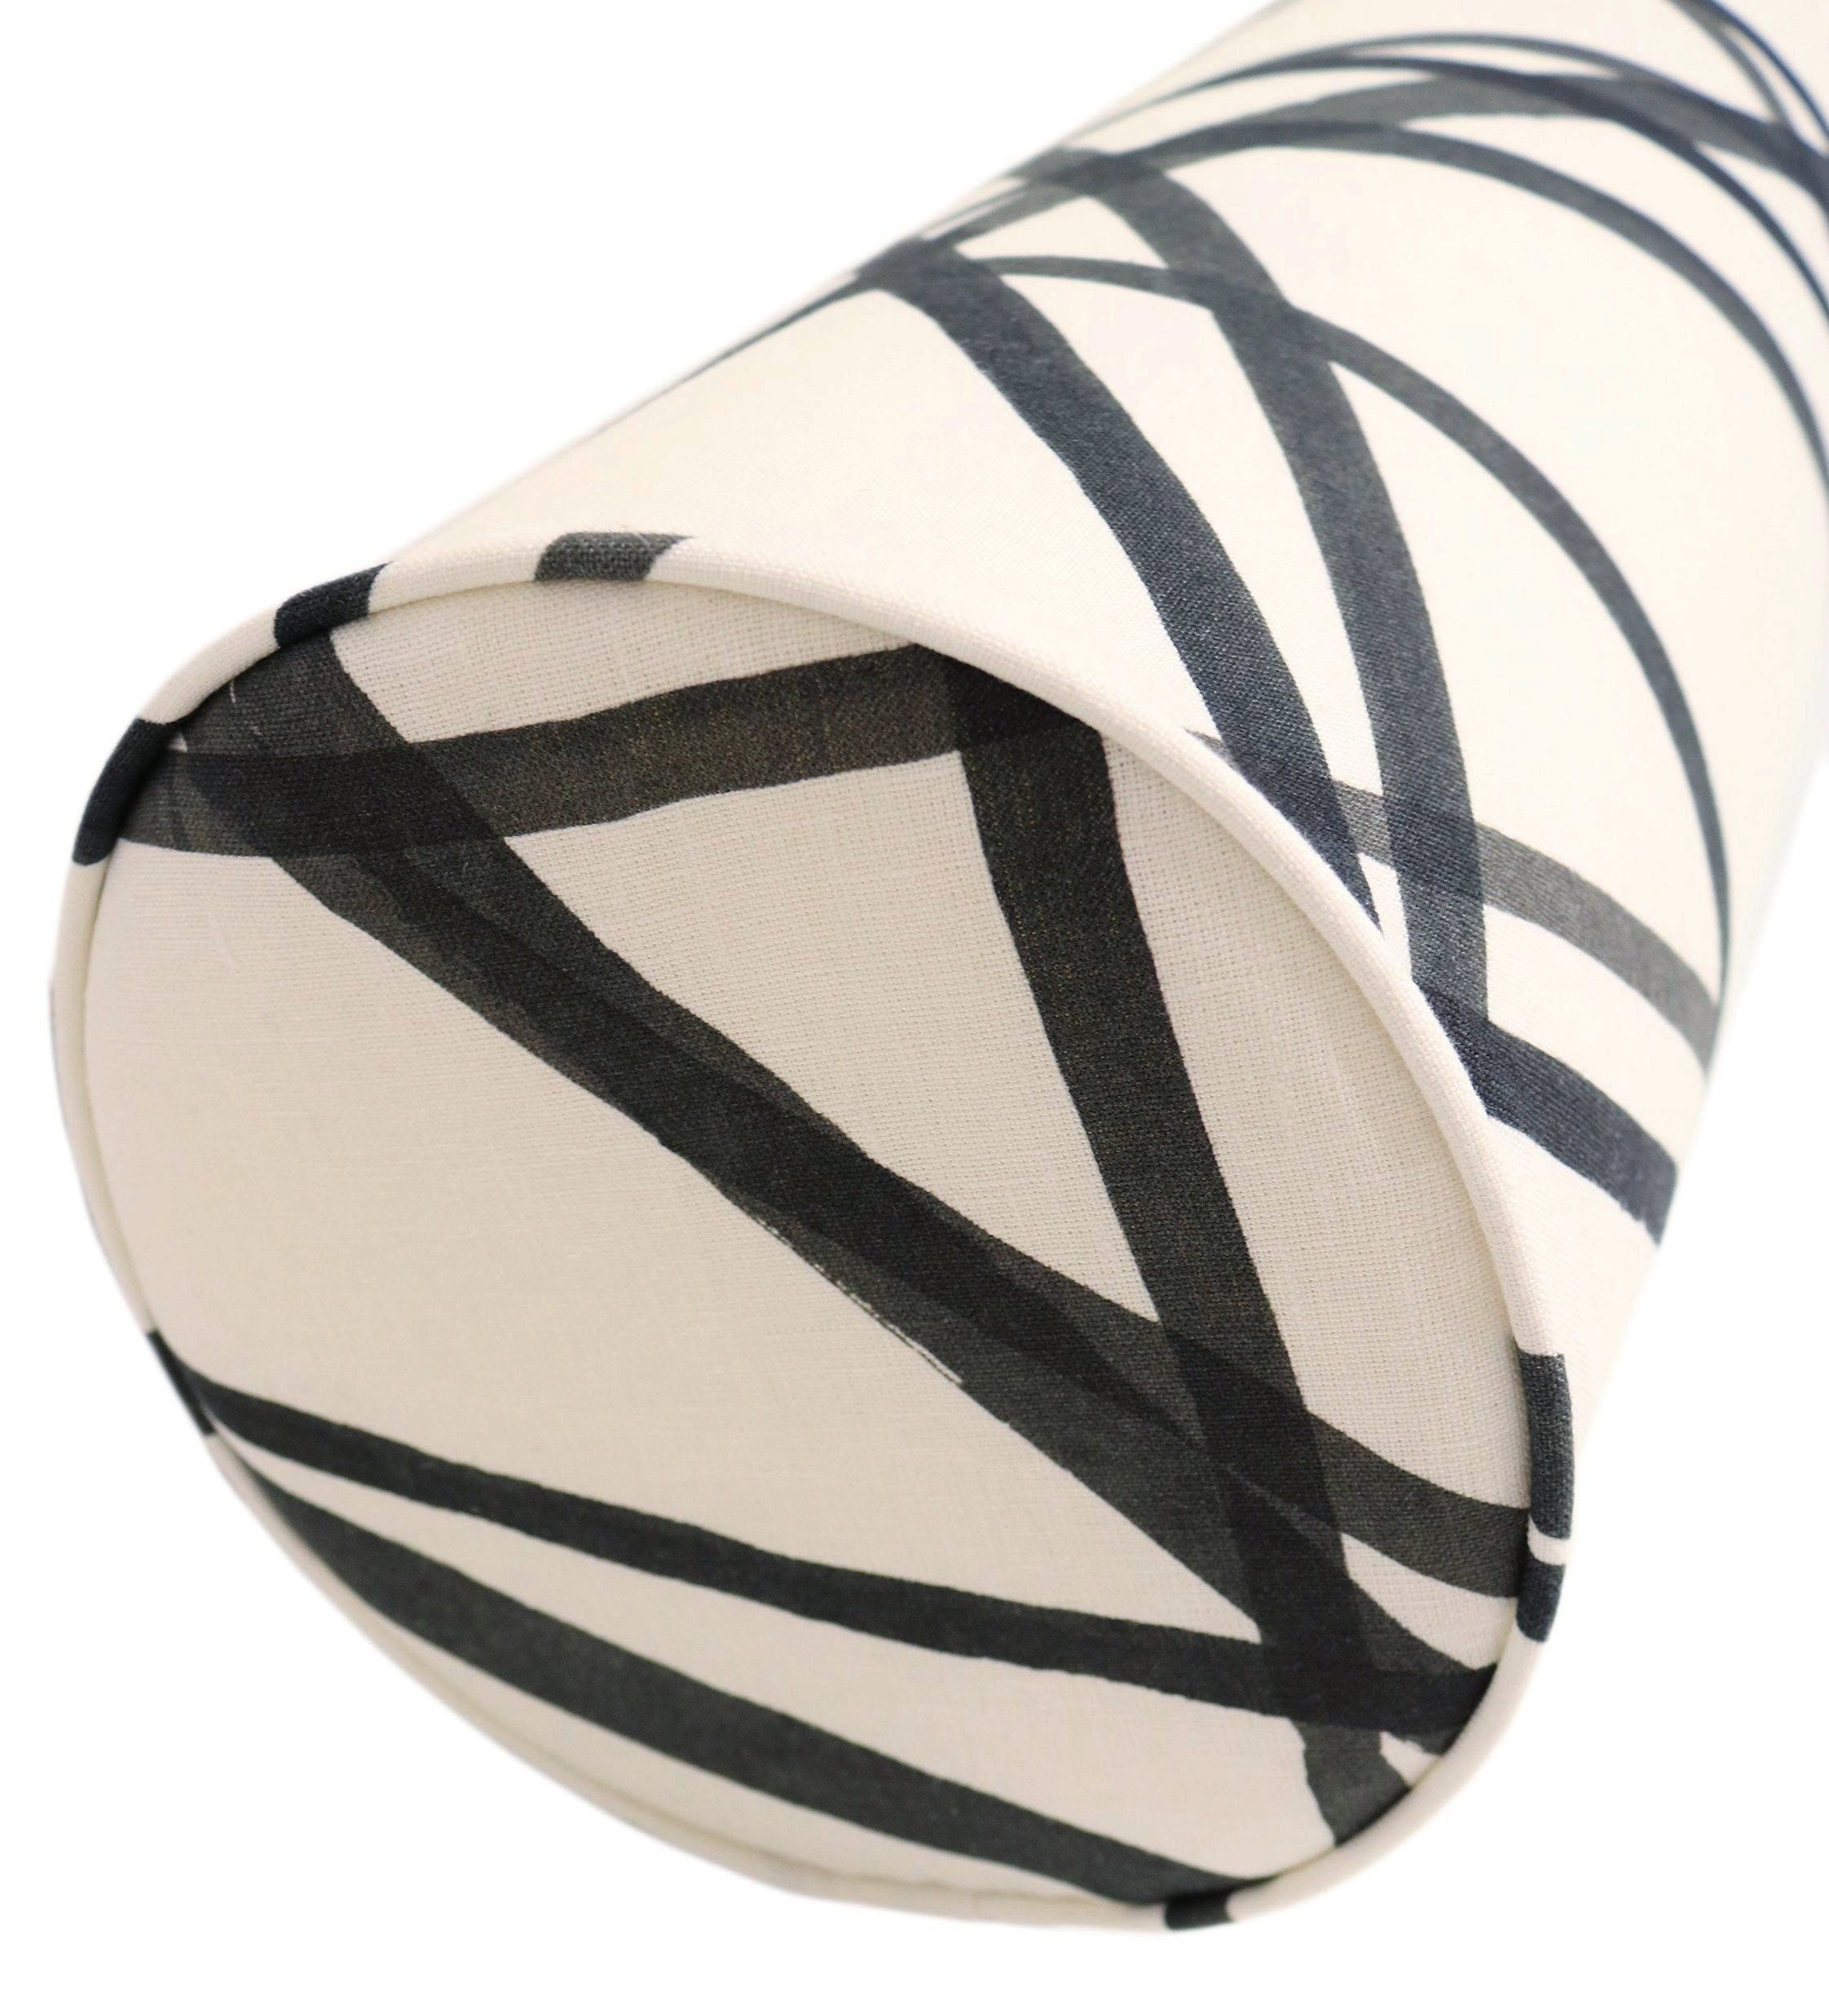 THE BOLSTER :: CHANNELS // EBONY + IVORY - KING // 9" X 48" - Image 2